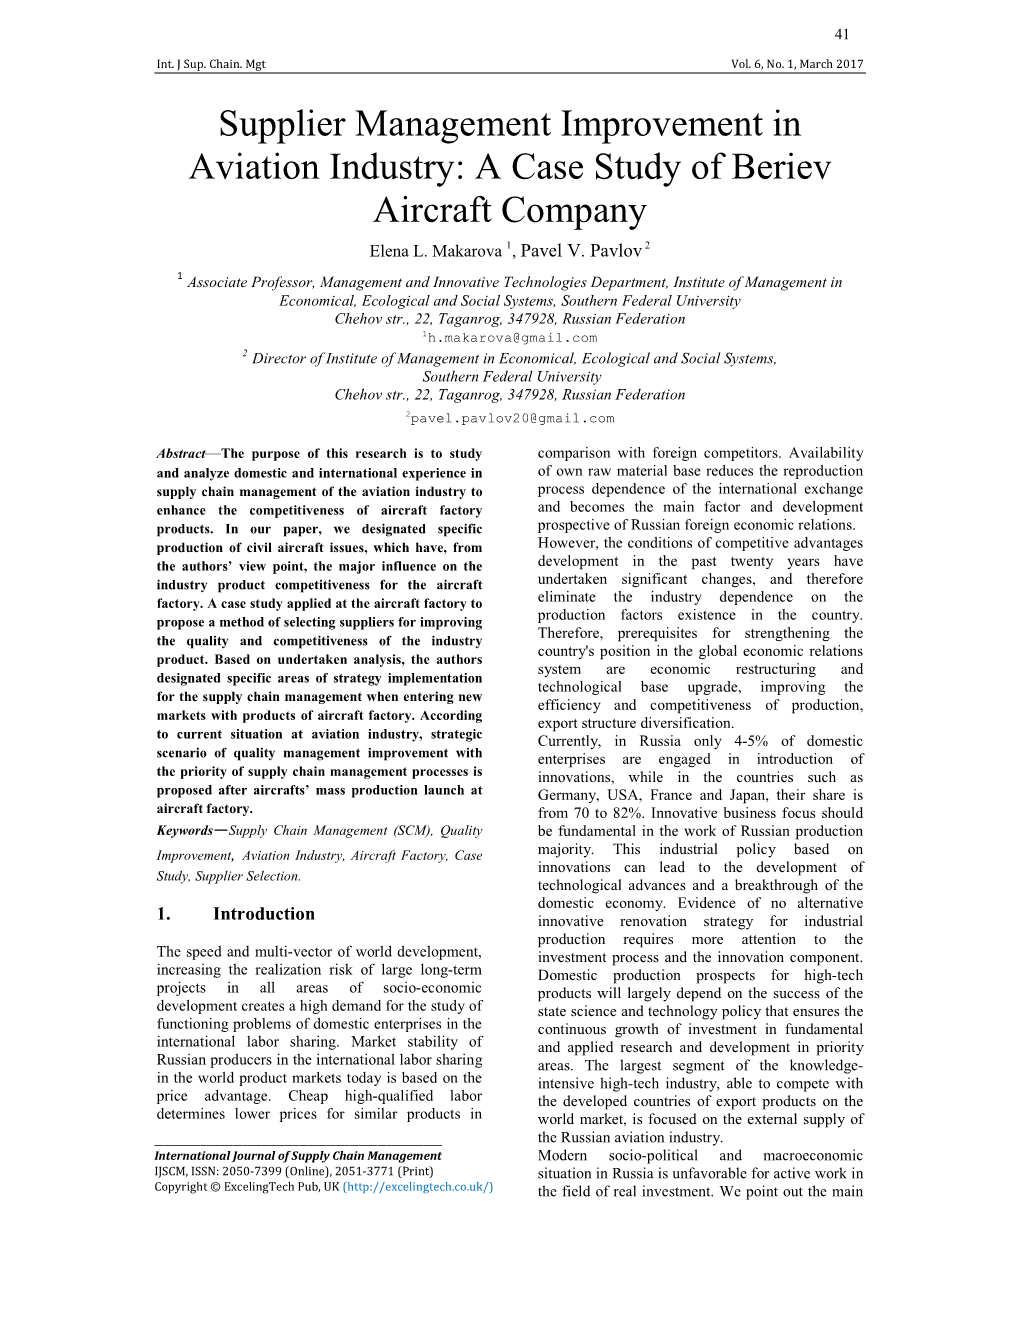 Supplier Management Improvement in Aviation Industry: a Case Study of Beriev Aircraft Company Elena L